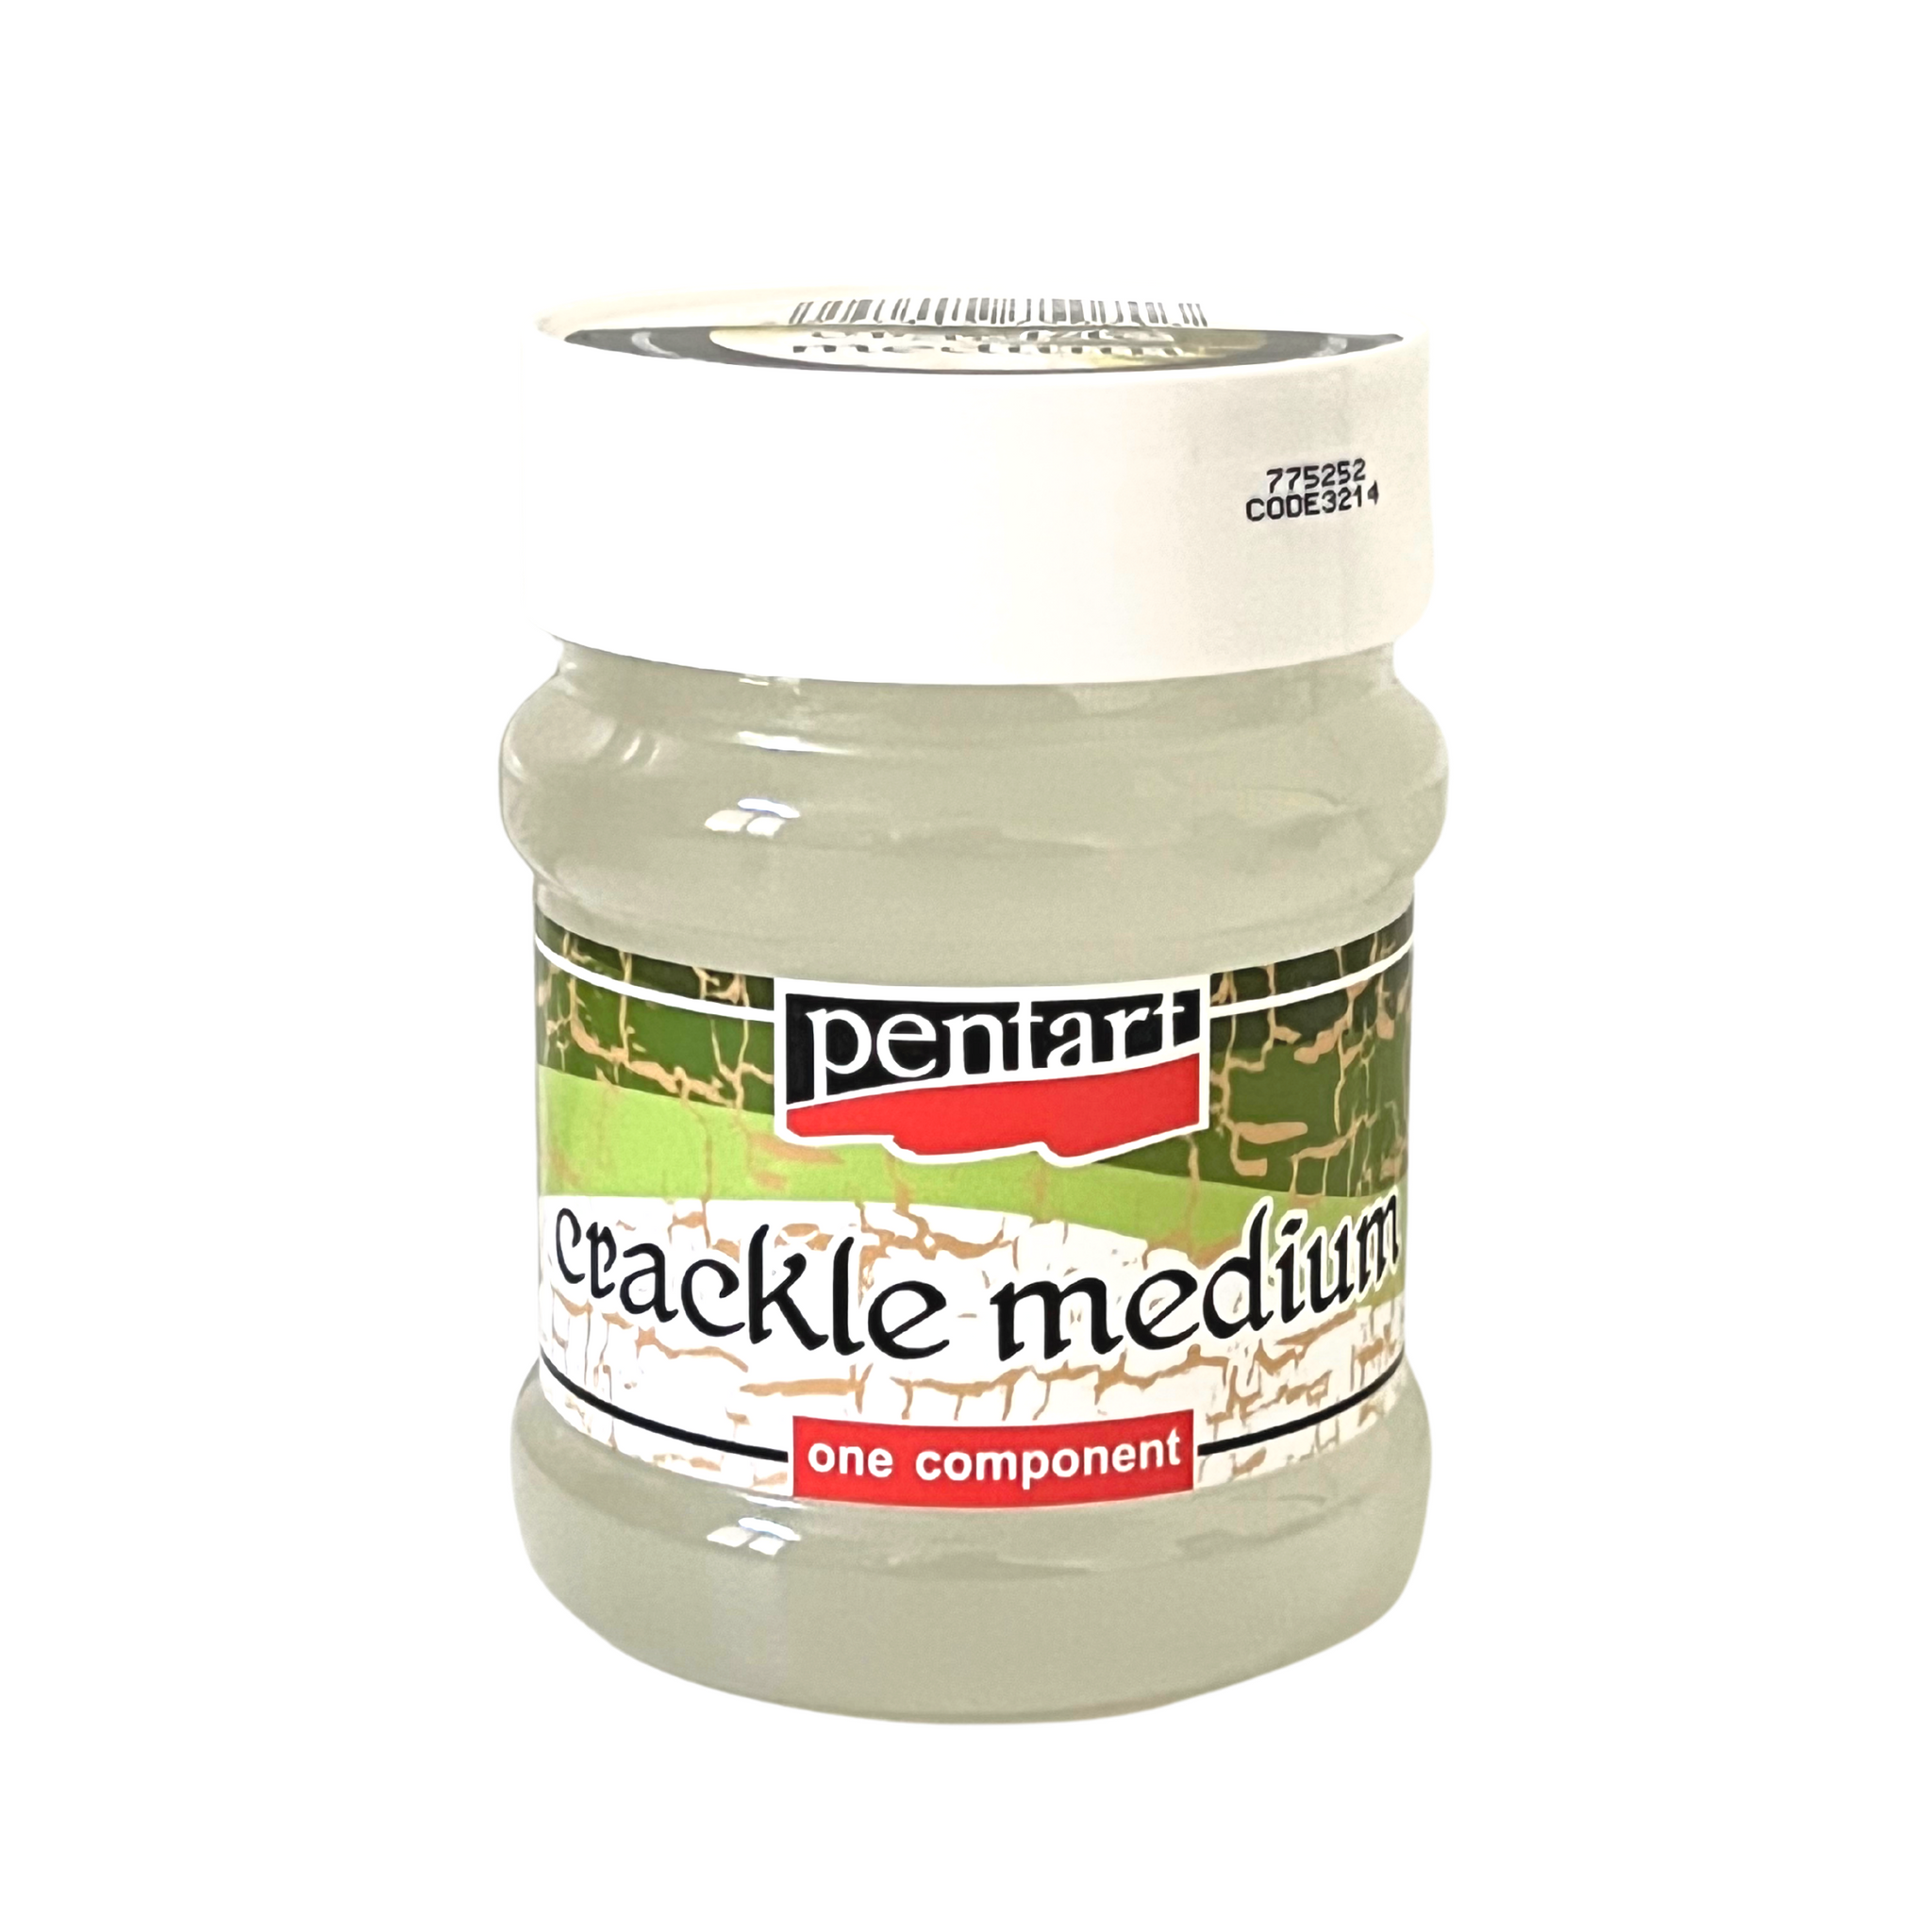 CRACKLE MEDIUM one Component 100 ml / DECOUPAGE / CRAFT/ WATER BASED